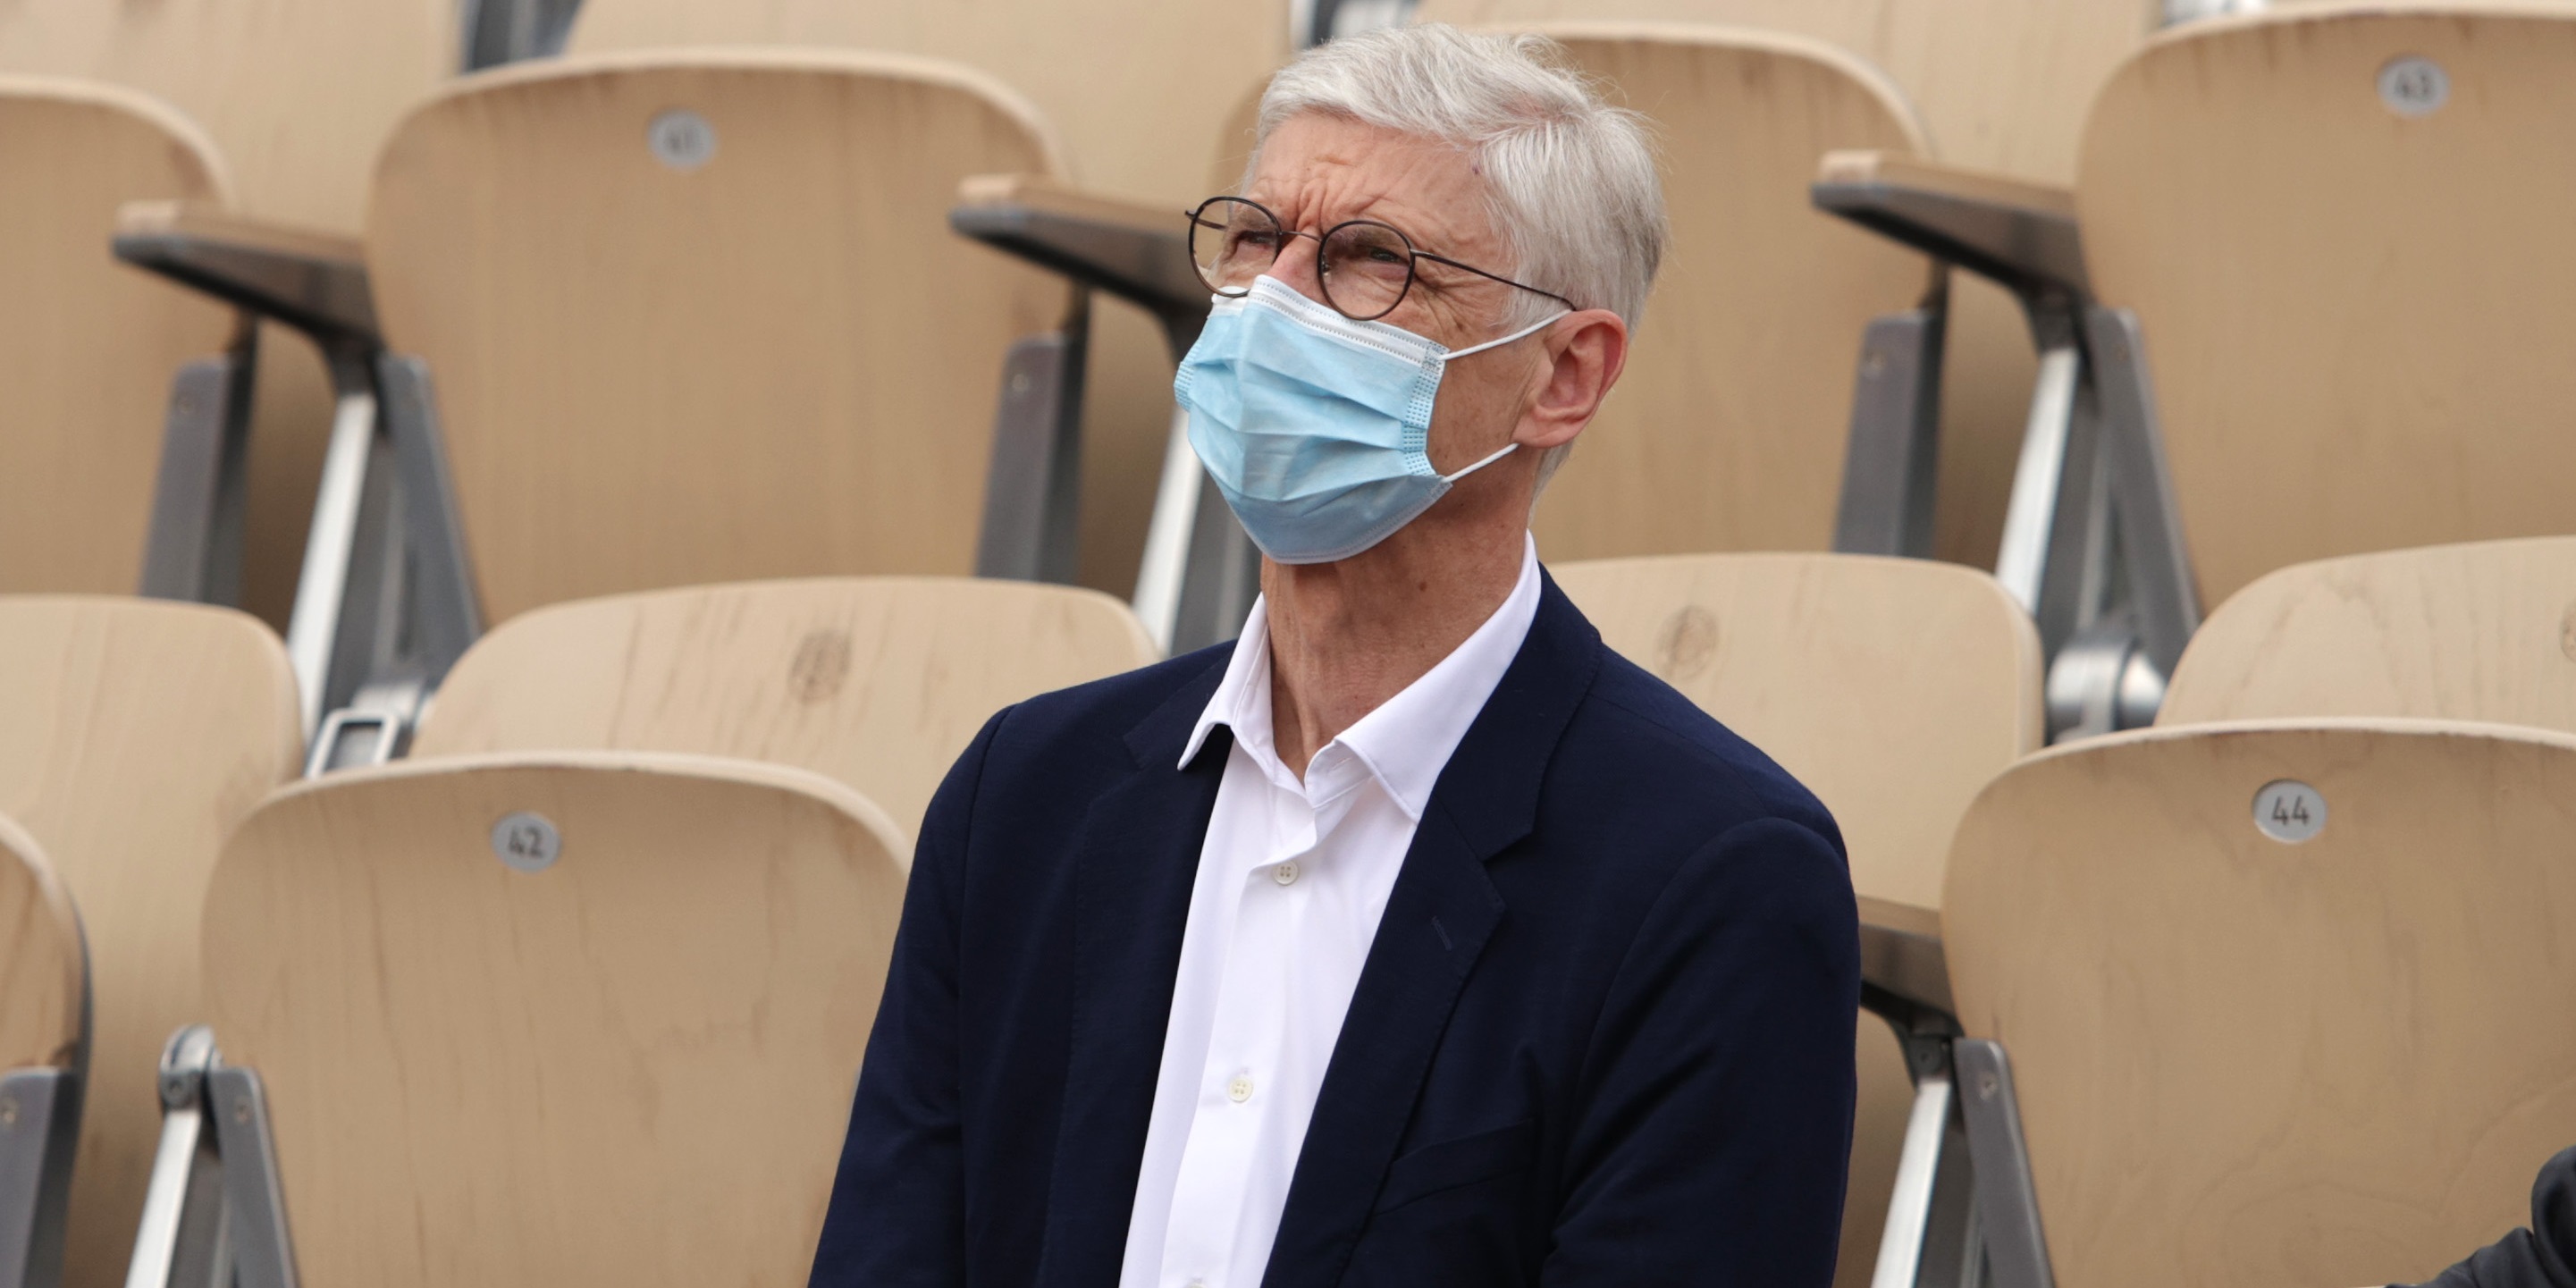 Exclusive: ‘You’re talking cobblers’ – Collymore rips into Wenger’s ‘nonsense’ World Cup proposal